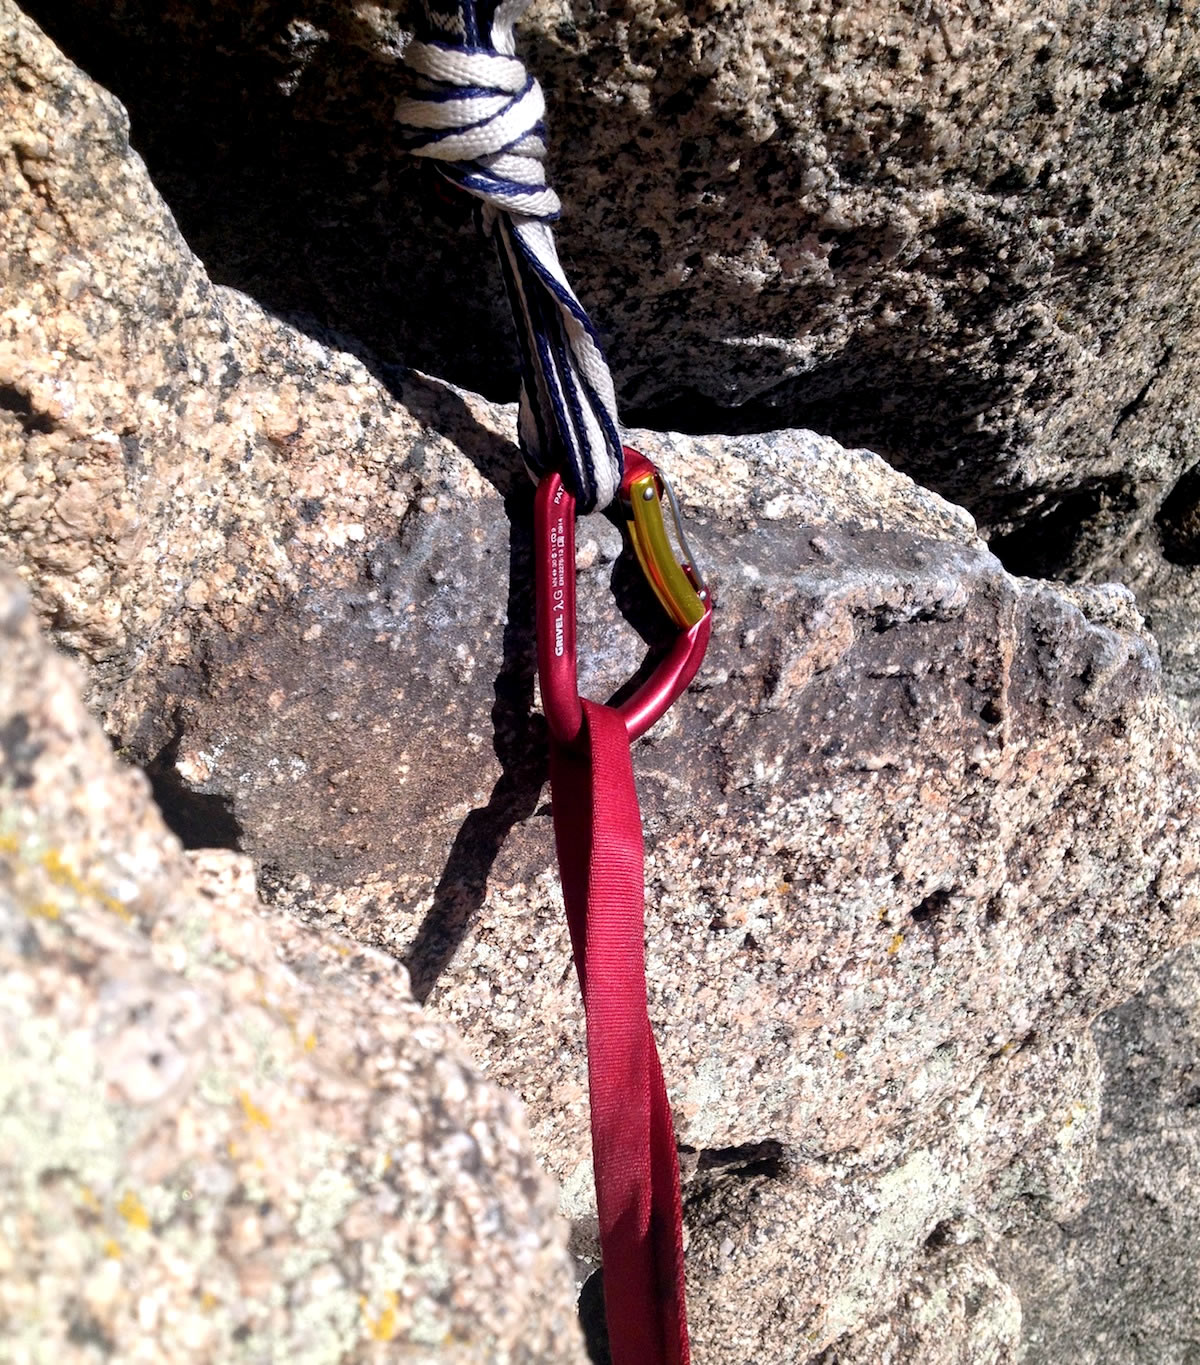 The auto-locking Lambda also worked well in situations where the climber had to clip into an anchor with one hand, which can be difficult with other auto-locking carabiners. [Photo] Alexander Kenan